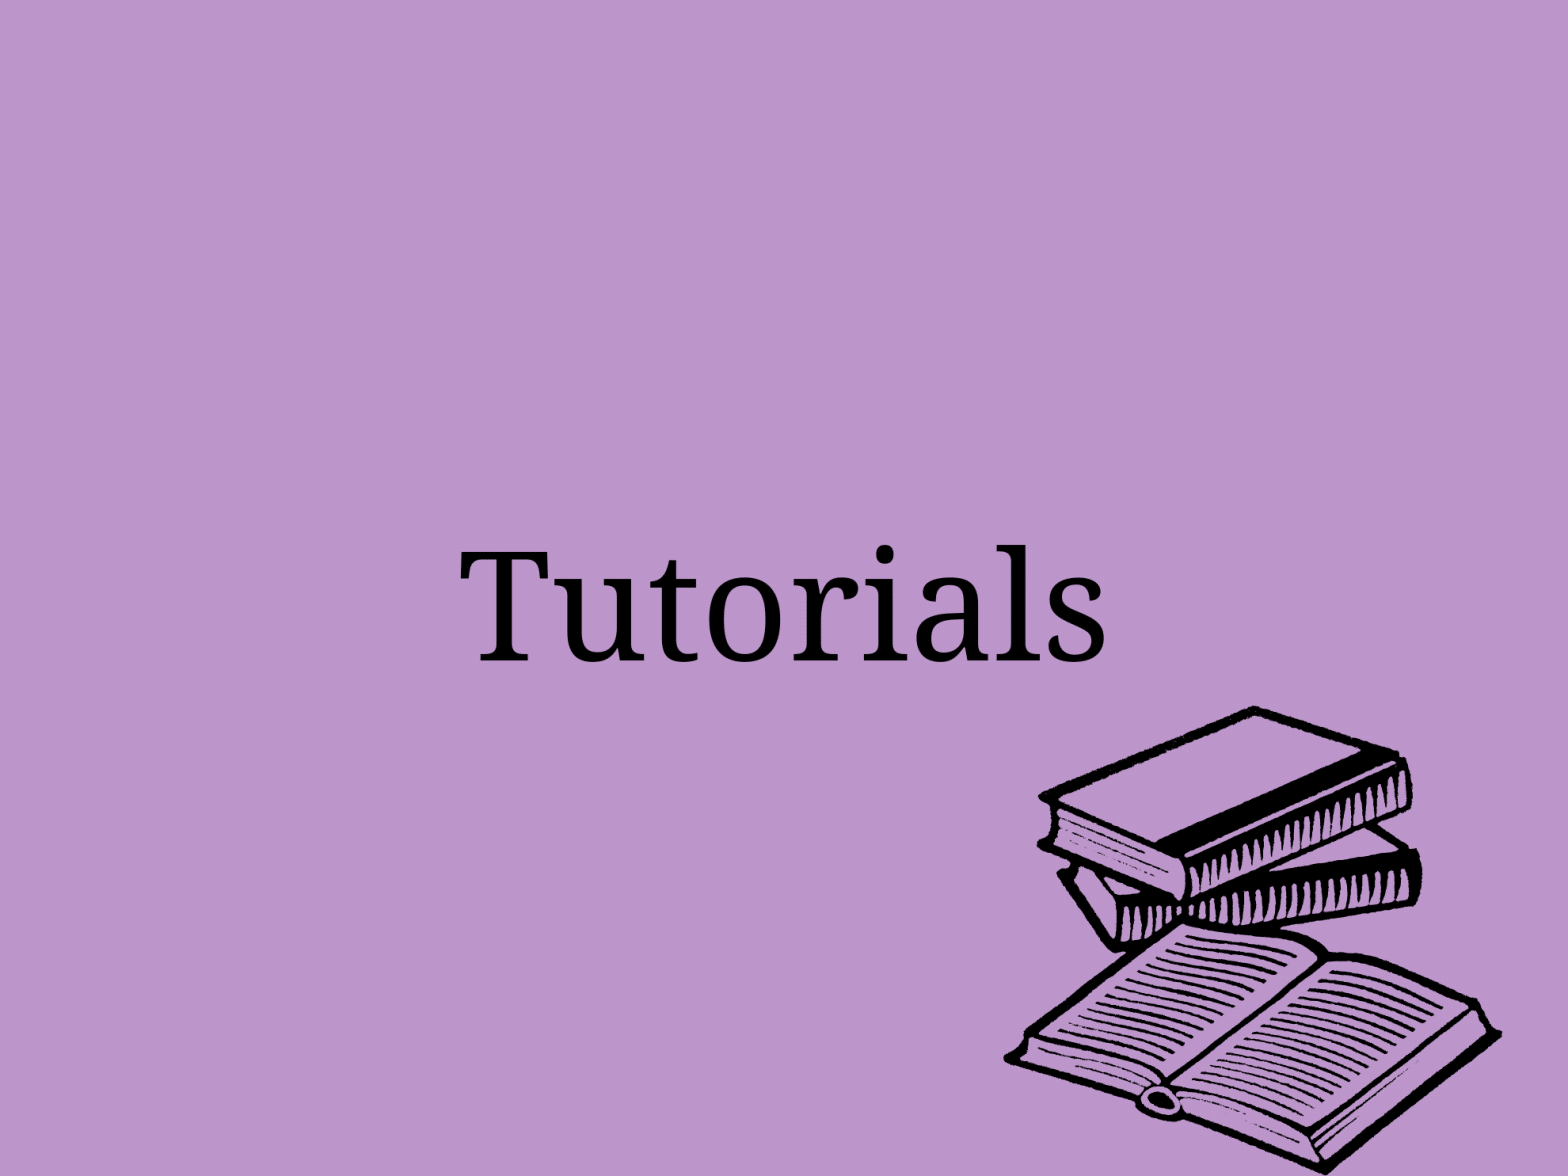 Cover image showing the text tutorials and a some books in the bottom right corner, set on a purple background